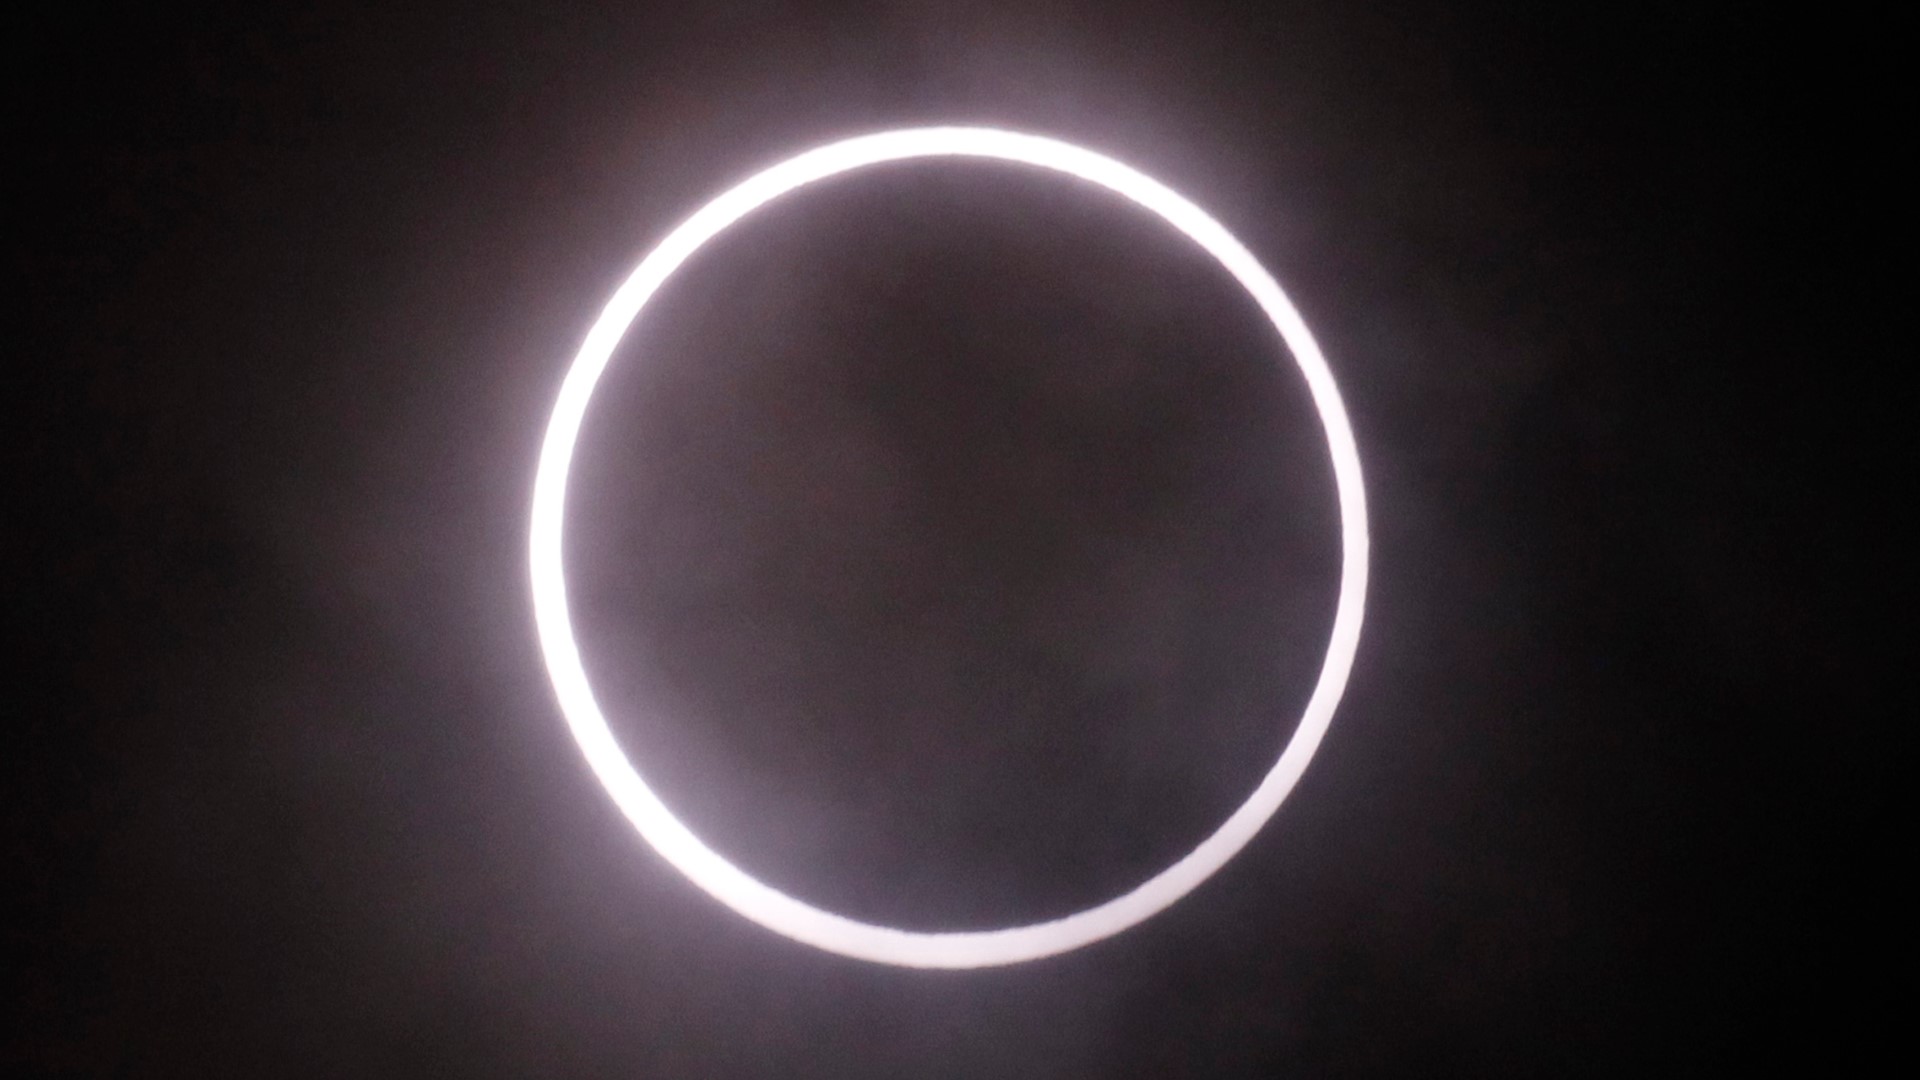 The annular eclipse Oct. 14 will form a "ring of fire" that will be visible from Mesa Verde National Park.